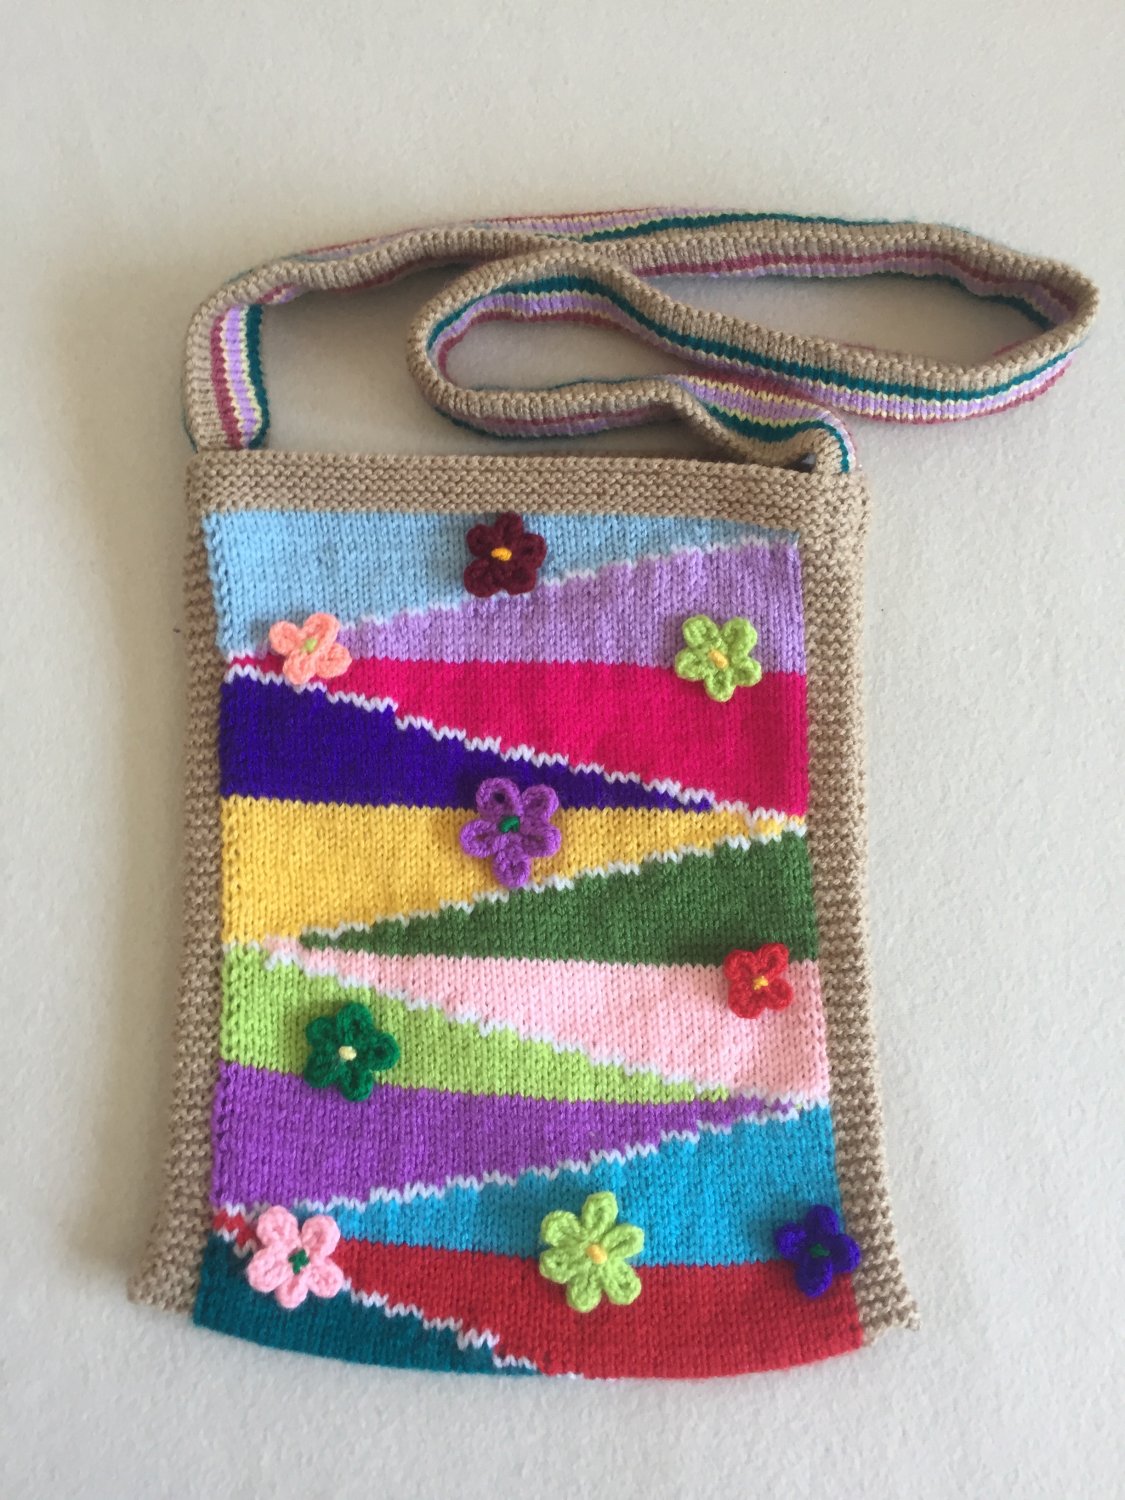 Knitted art purse...Free form bag